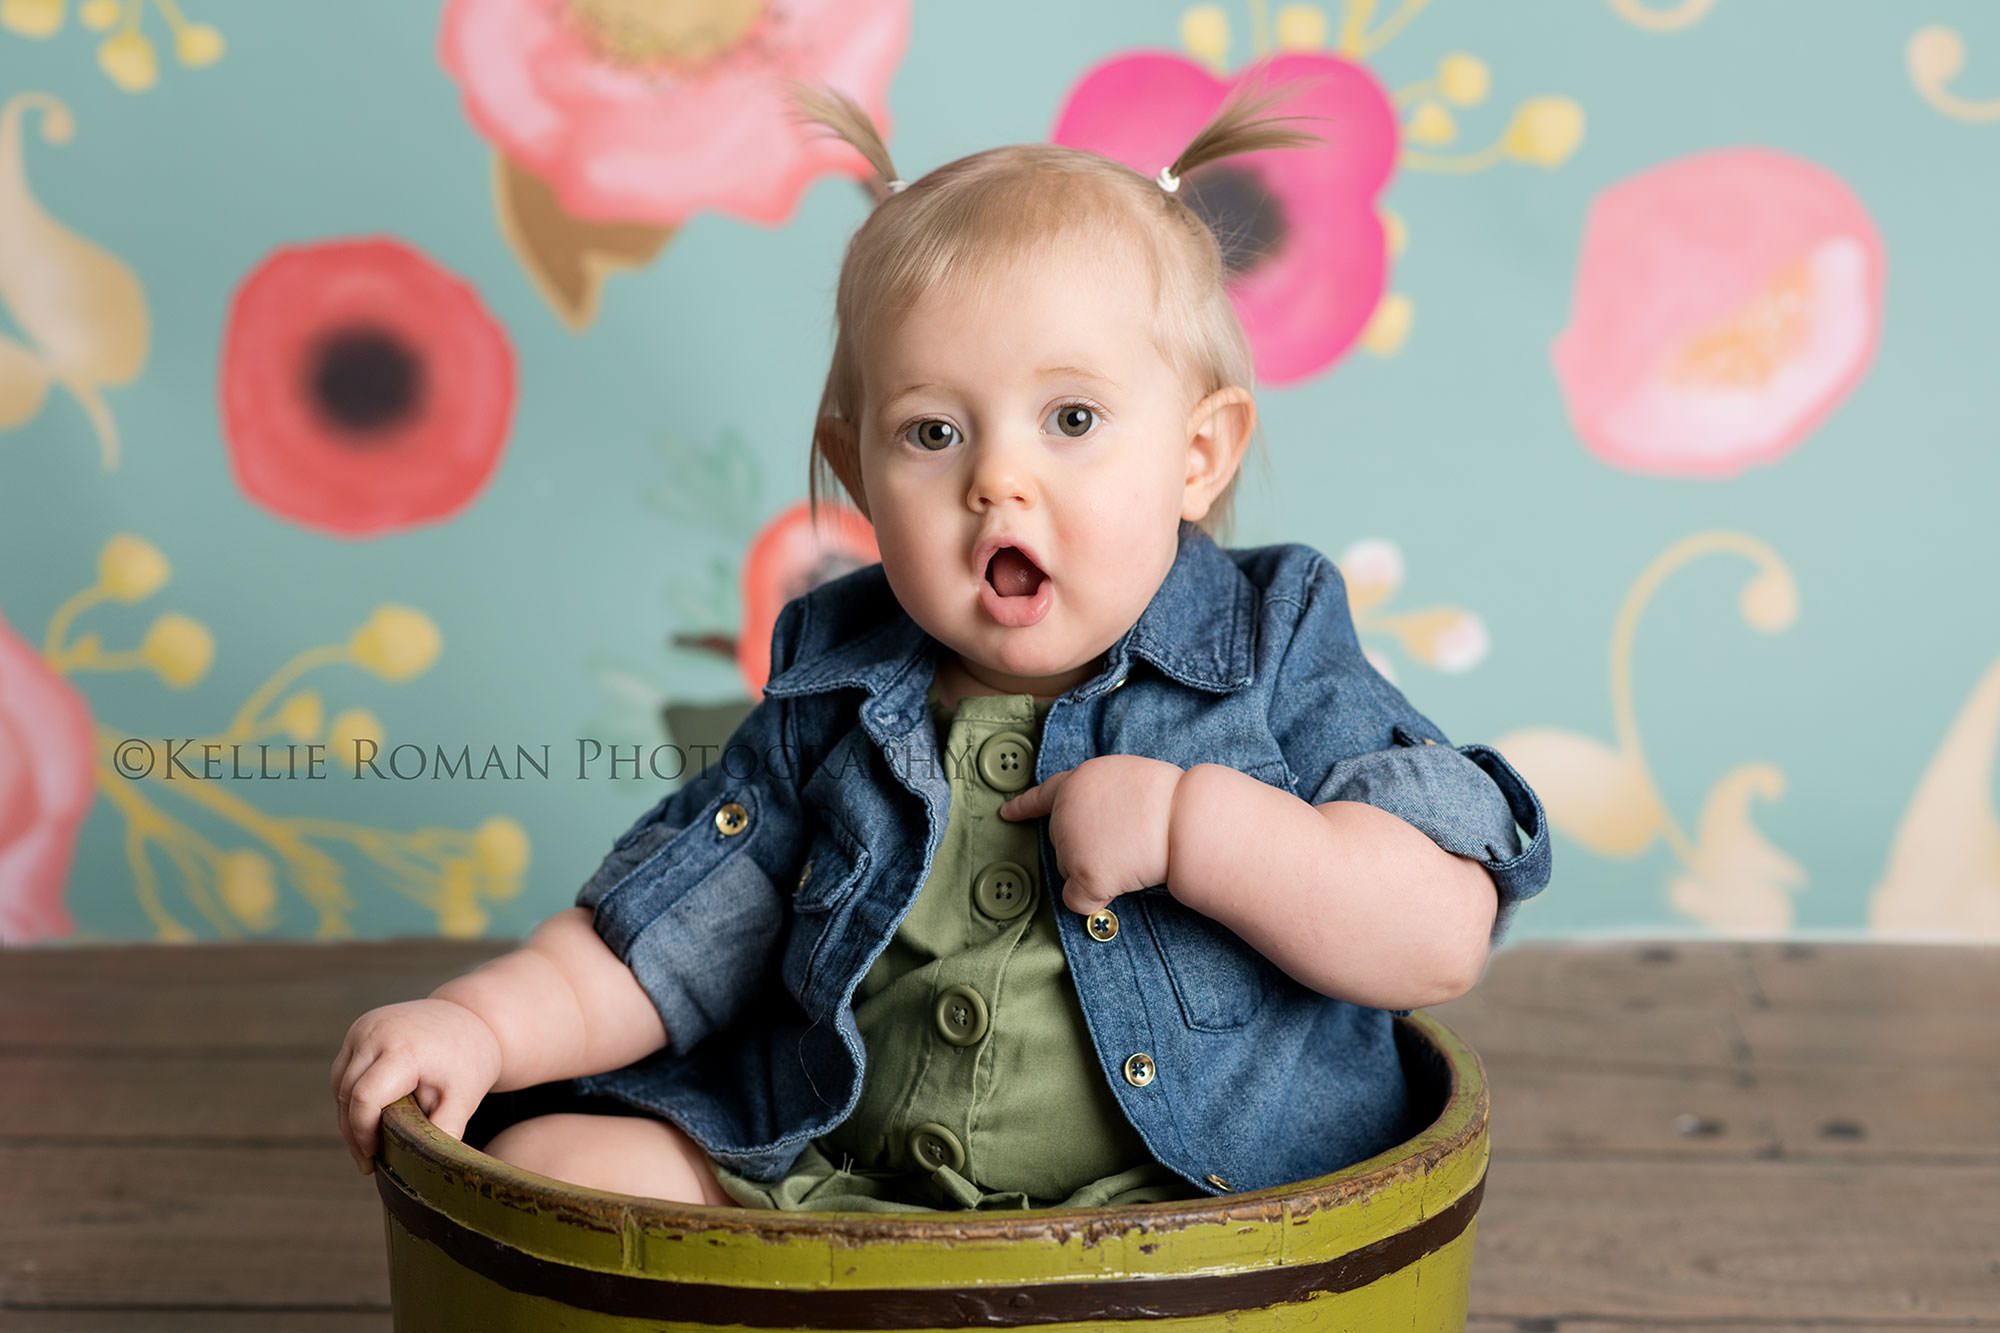 floral milestone session one year old girl from kenosha in a Milwaukee Wisconsin photography studio she is sitting in a green bucket on a wood floor in front of a teal and pink floral backdrop she has a denim shirt on with buttons and a green dress she's making a very surprised expression on her face